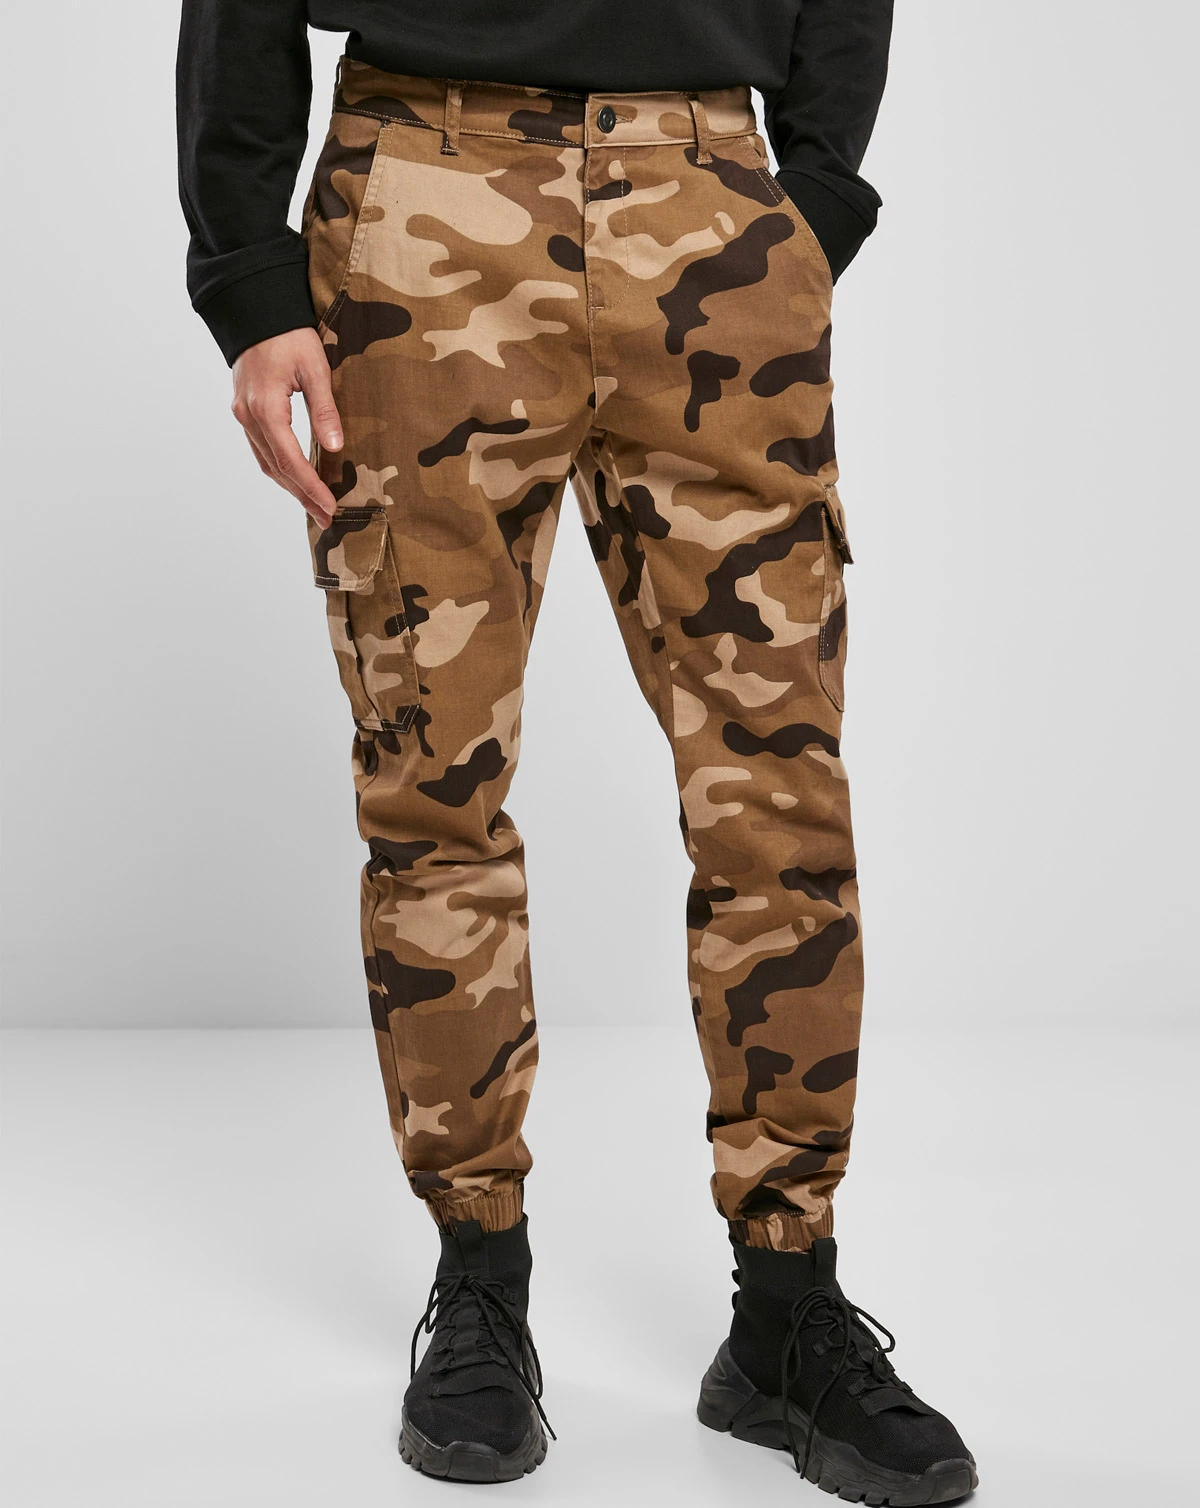 for men | Army pants | Army